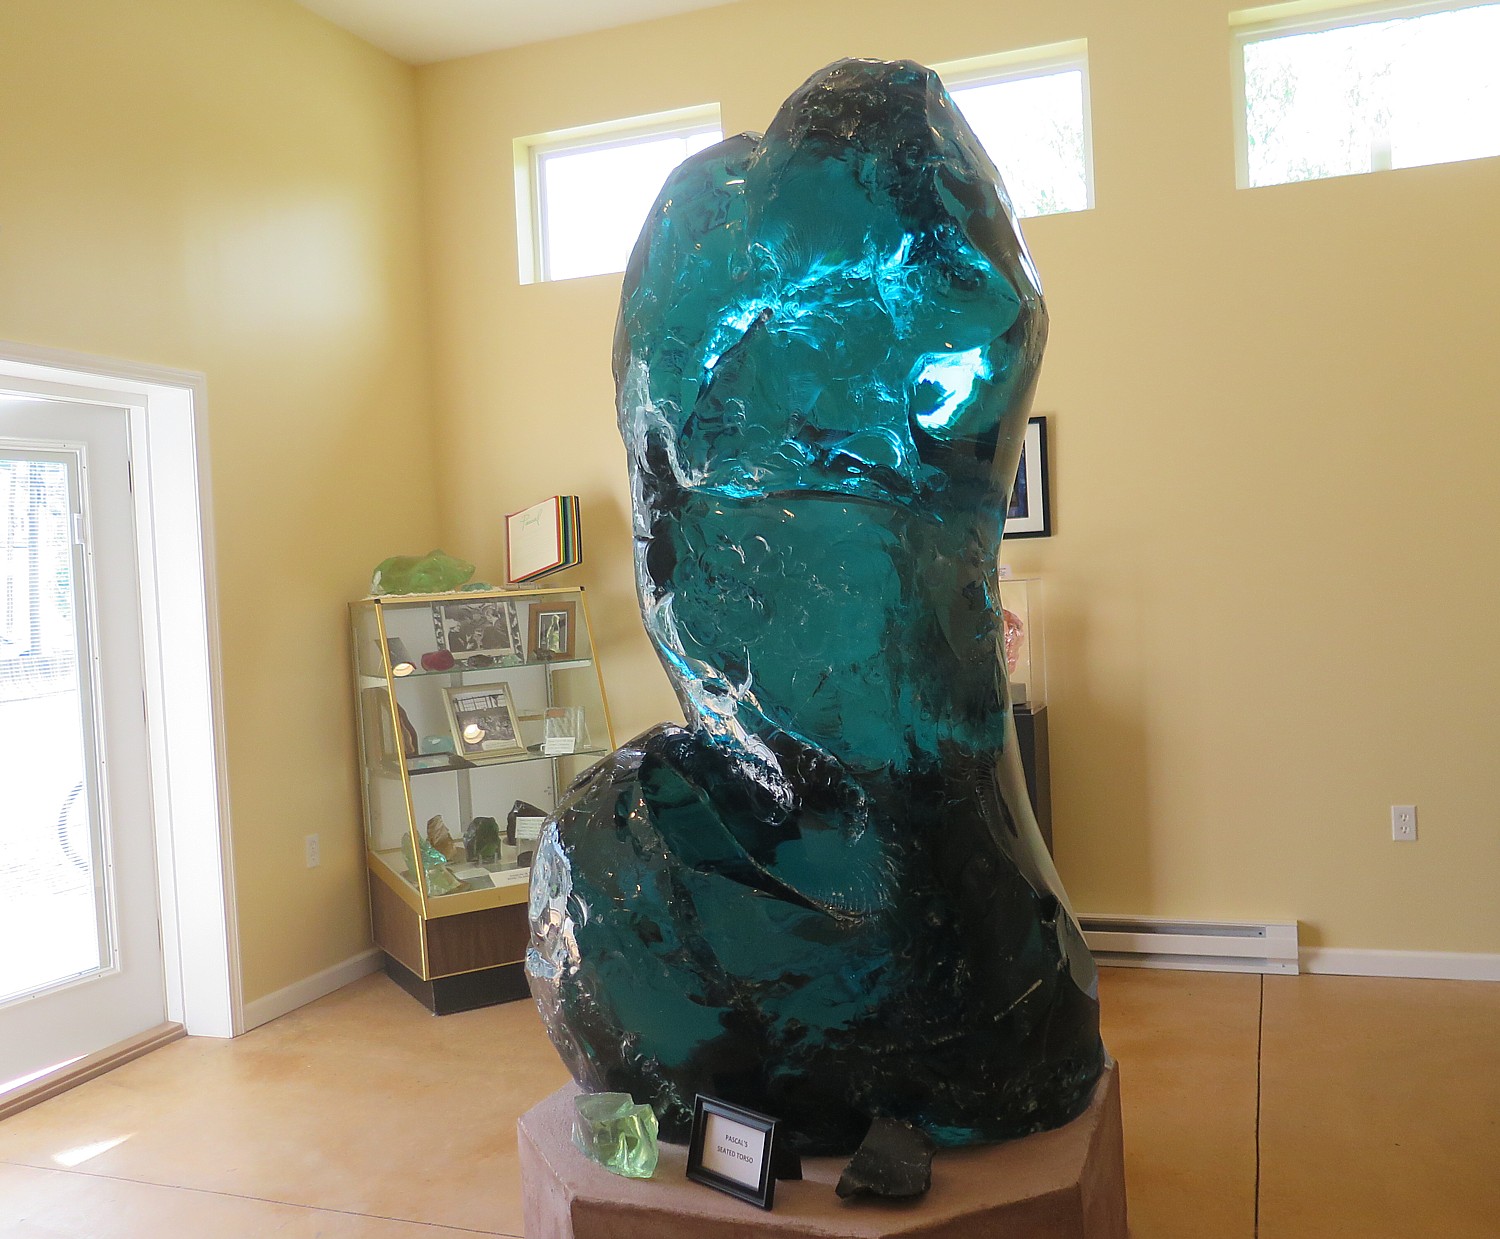 Artist Pascal’s “Seated Torso” glass sculpture now housed in a new Dunbar Historical Society annex should be a major draw to the town © 2016 Karen Rubin/goingplacesfarandnear.com